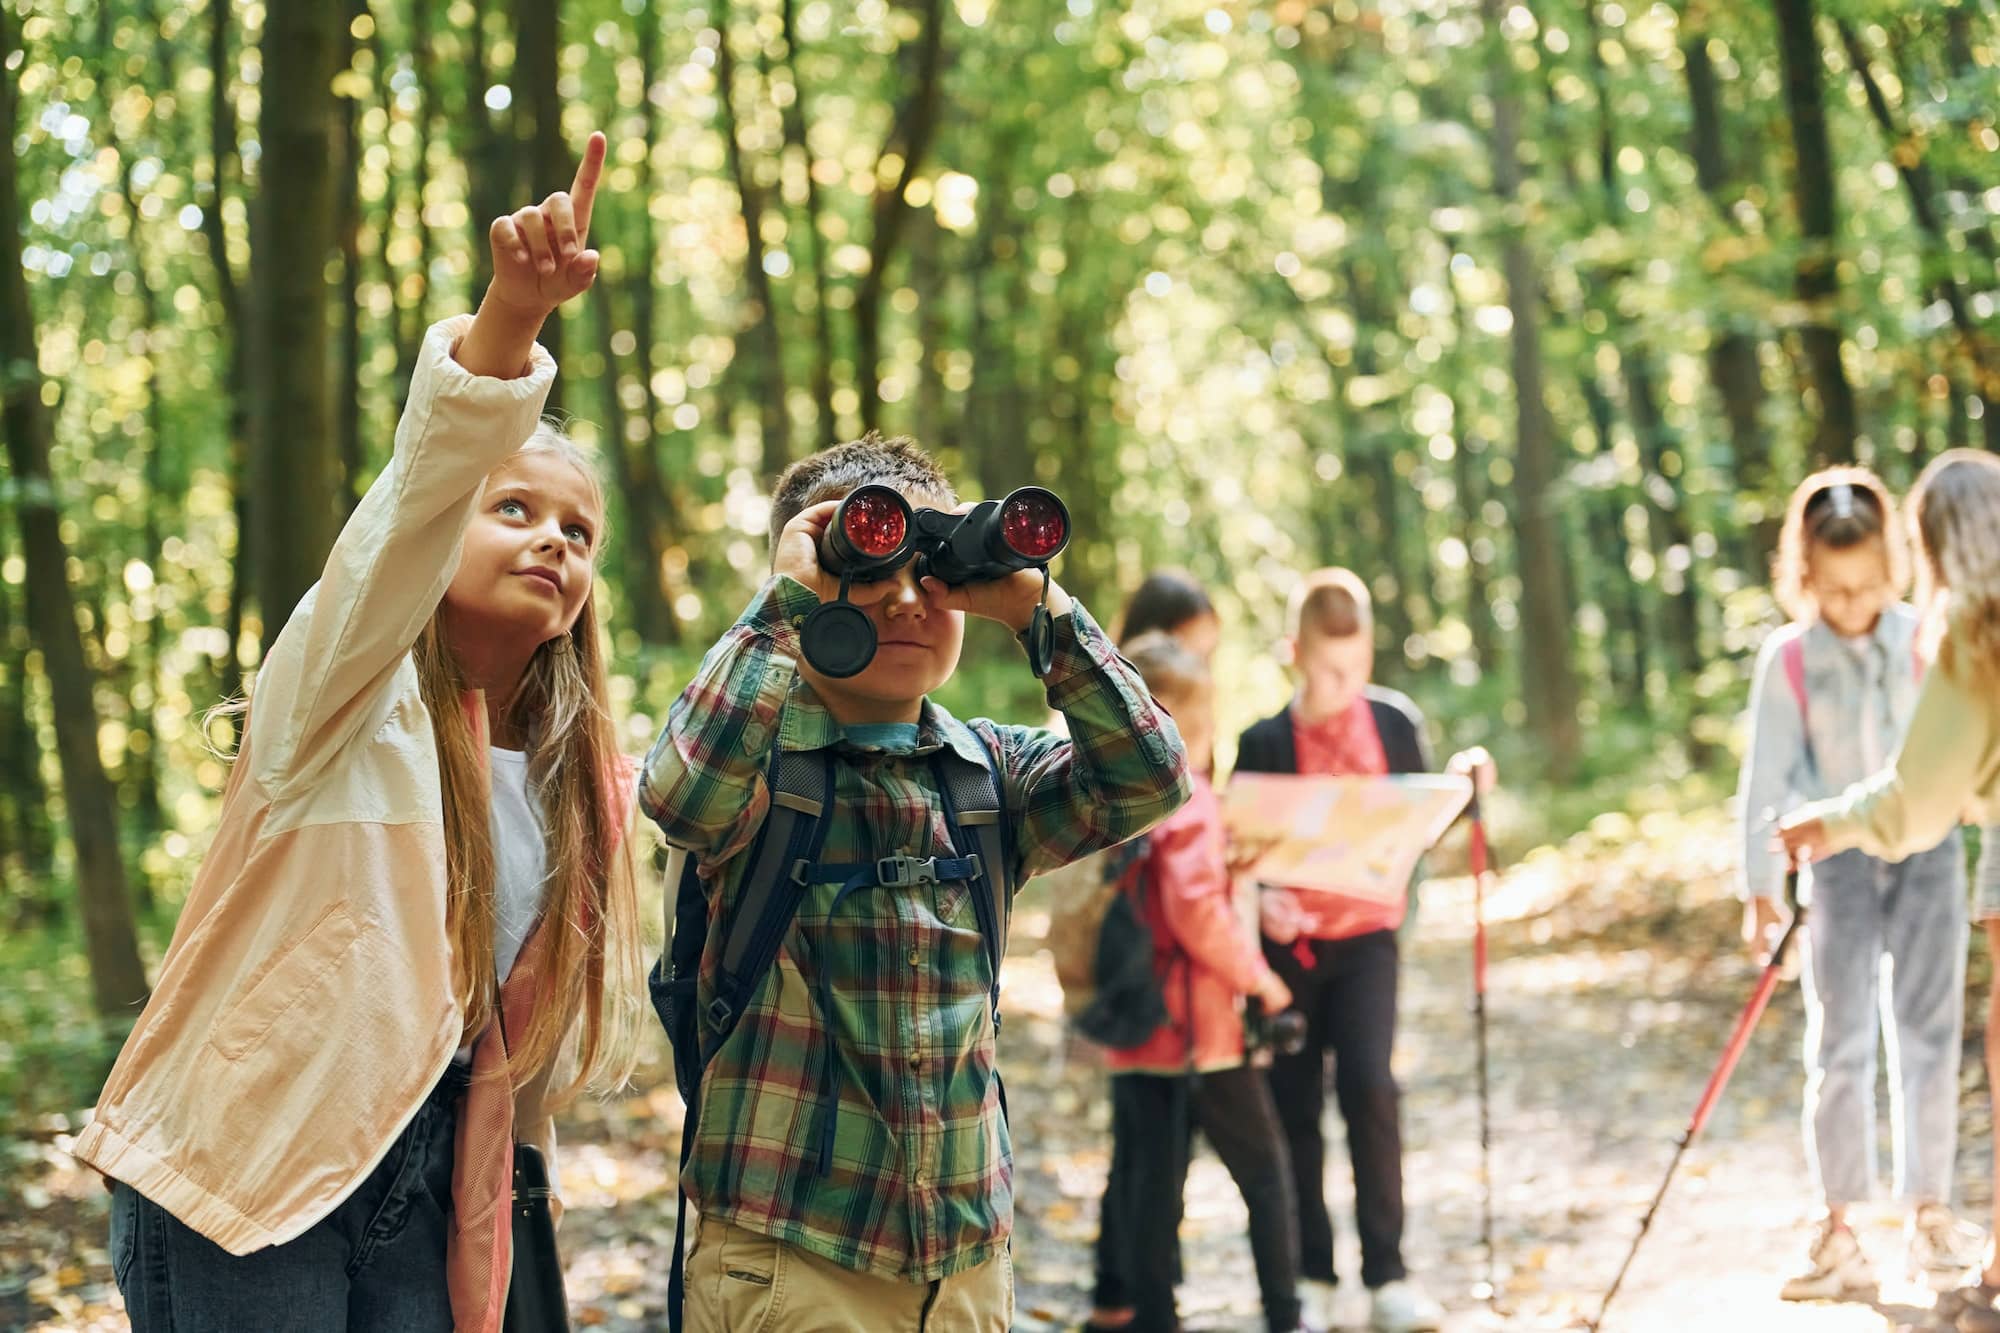 Conception of tourism. Kids in green forest at summer daytime together